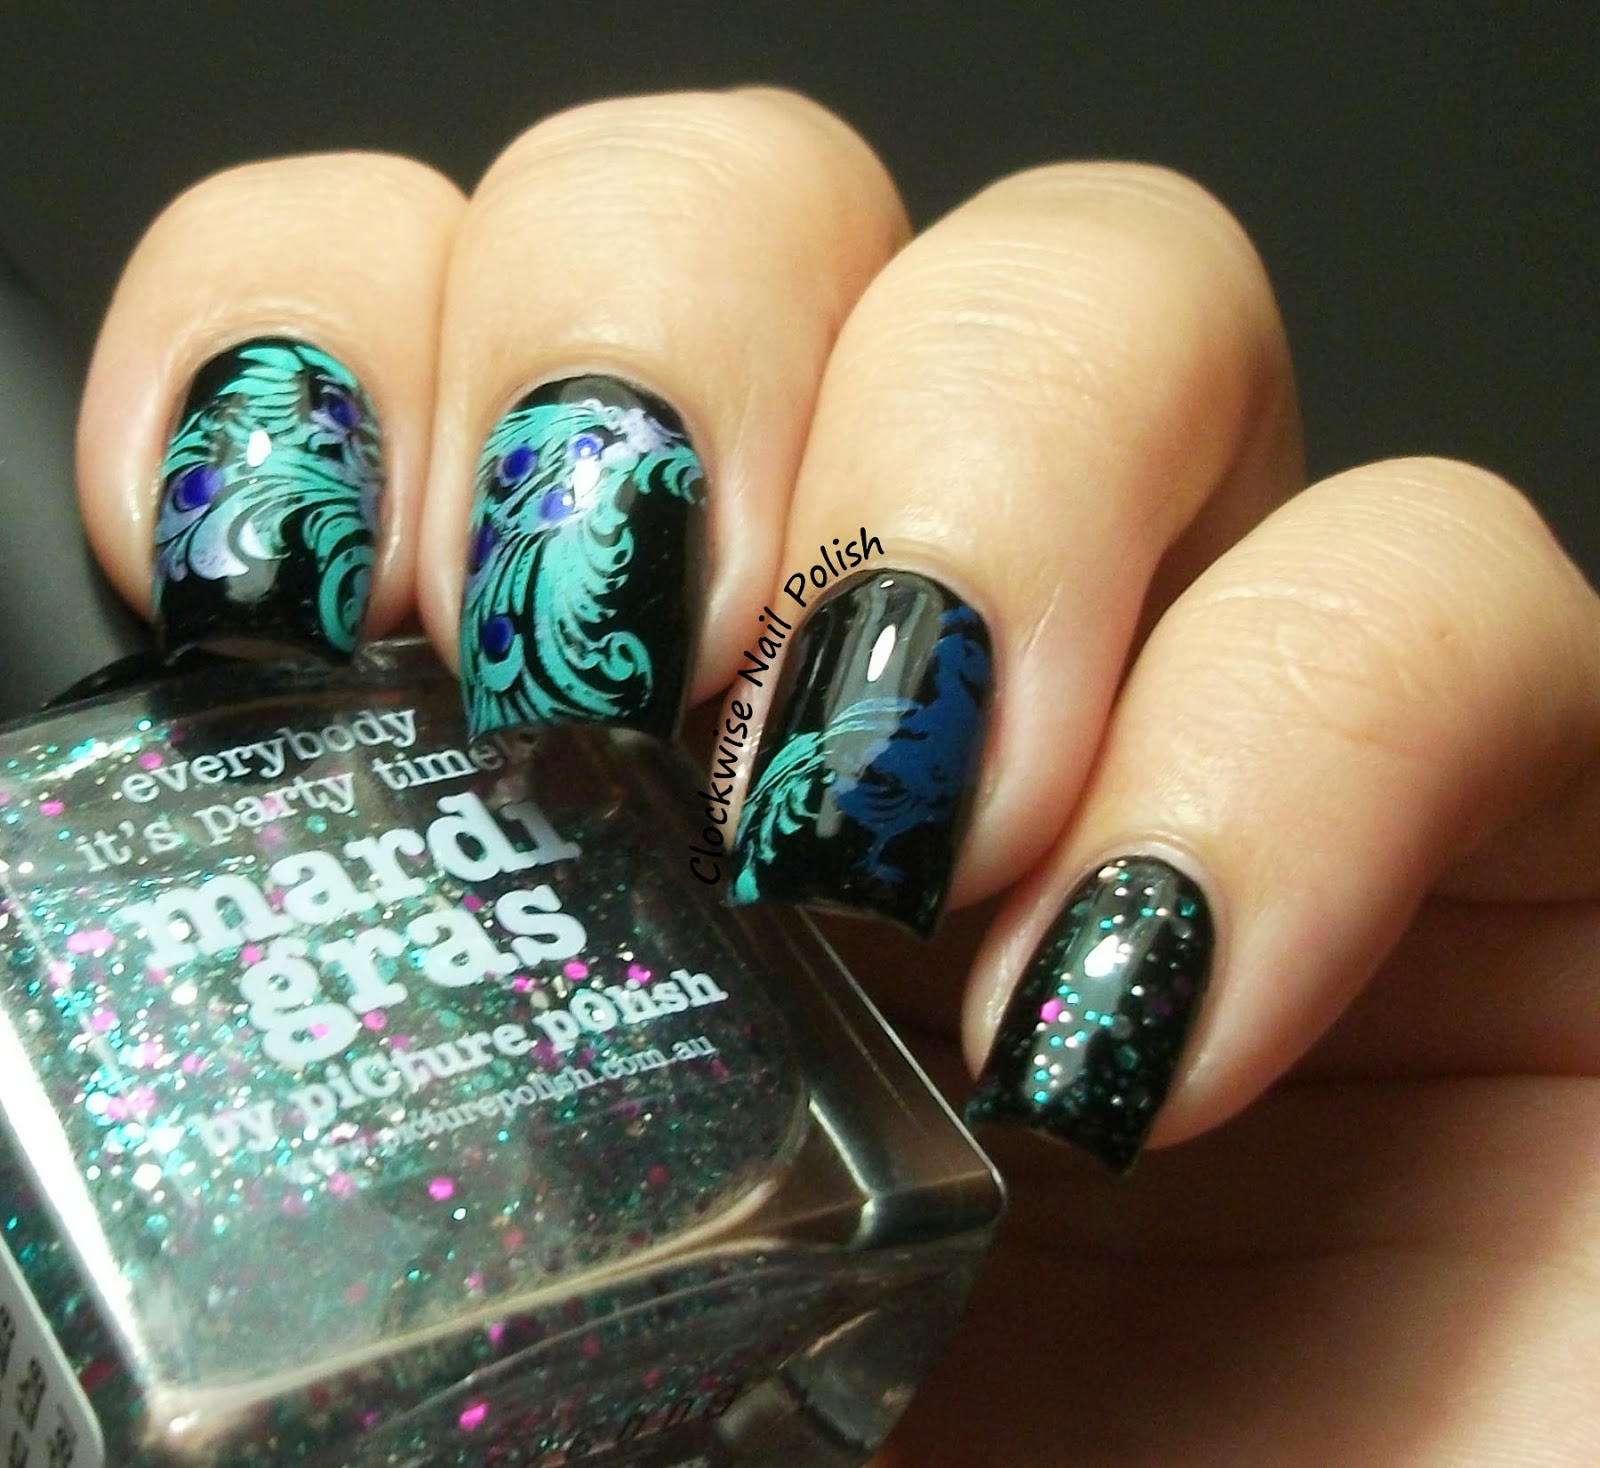 The Clockwise Nail Polish: Peacock and Flowers nail arts with Moyou ...